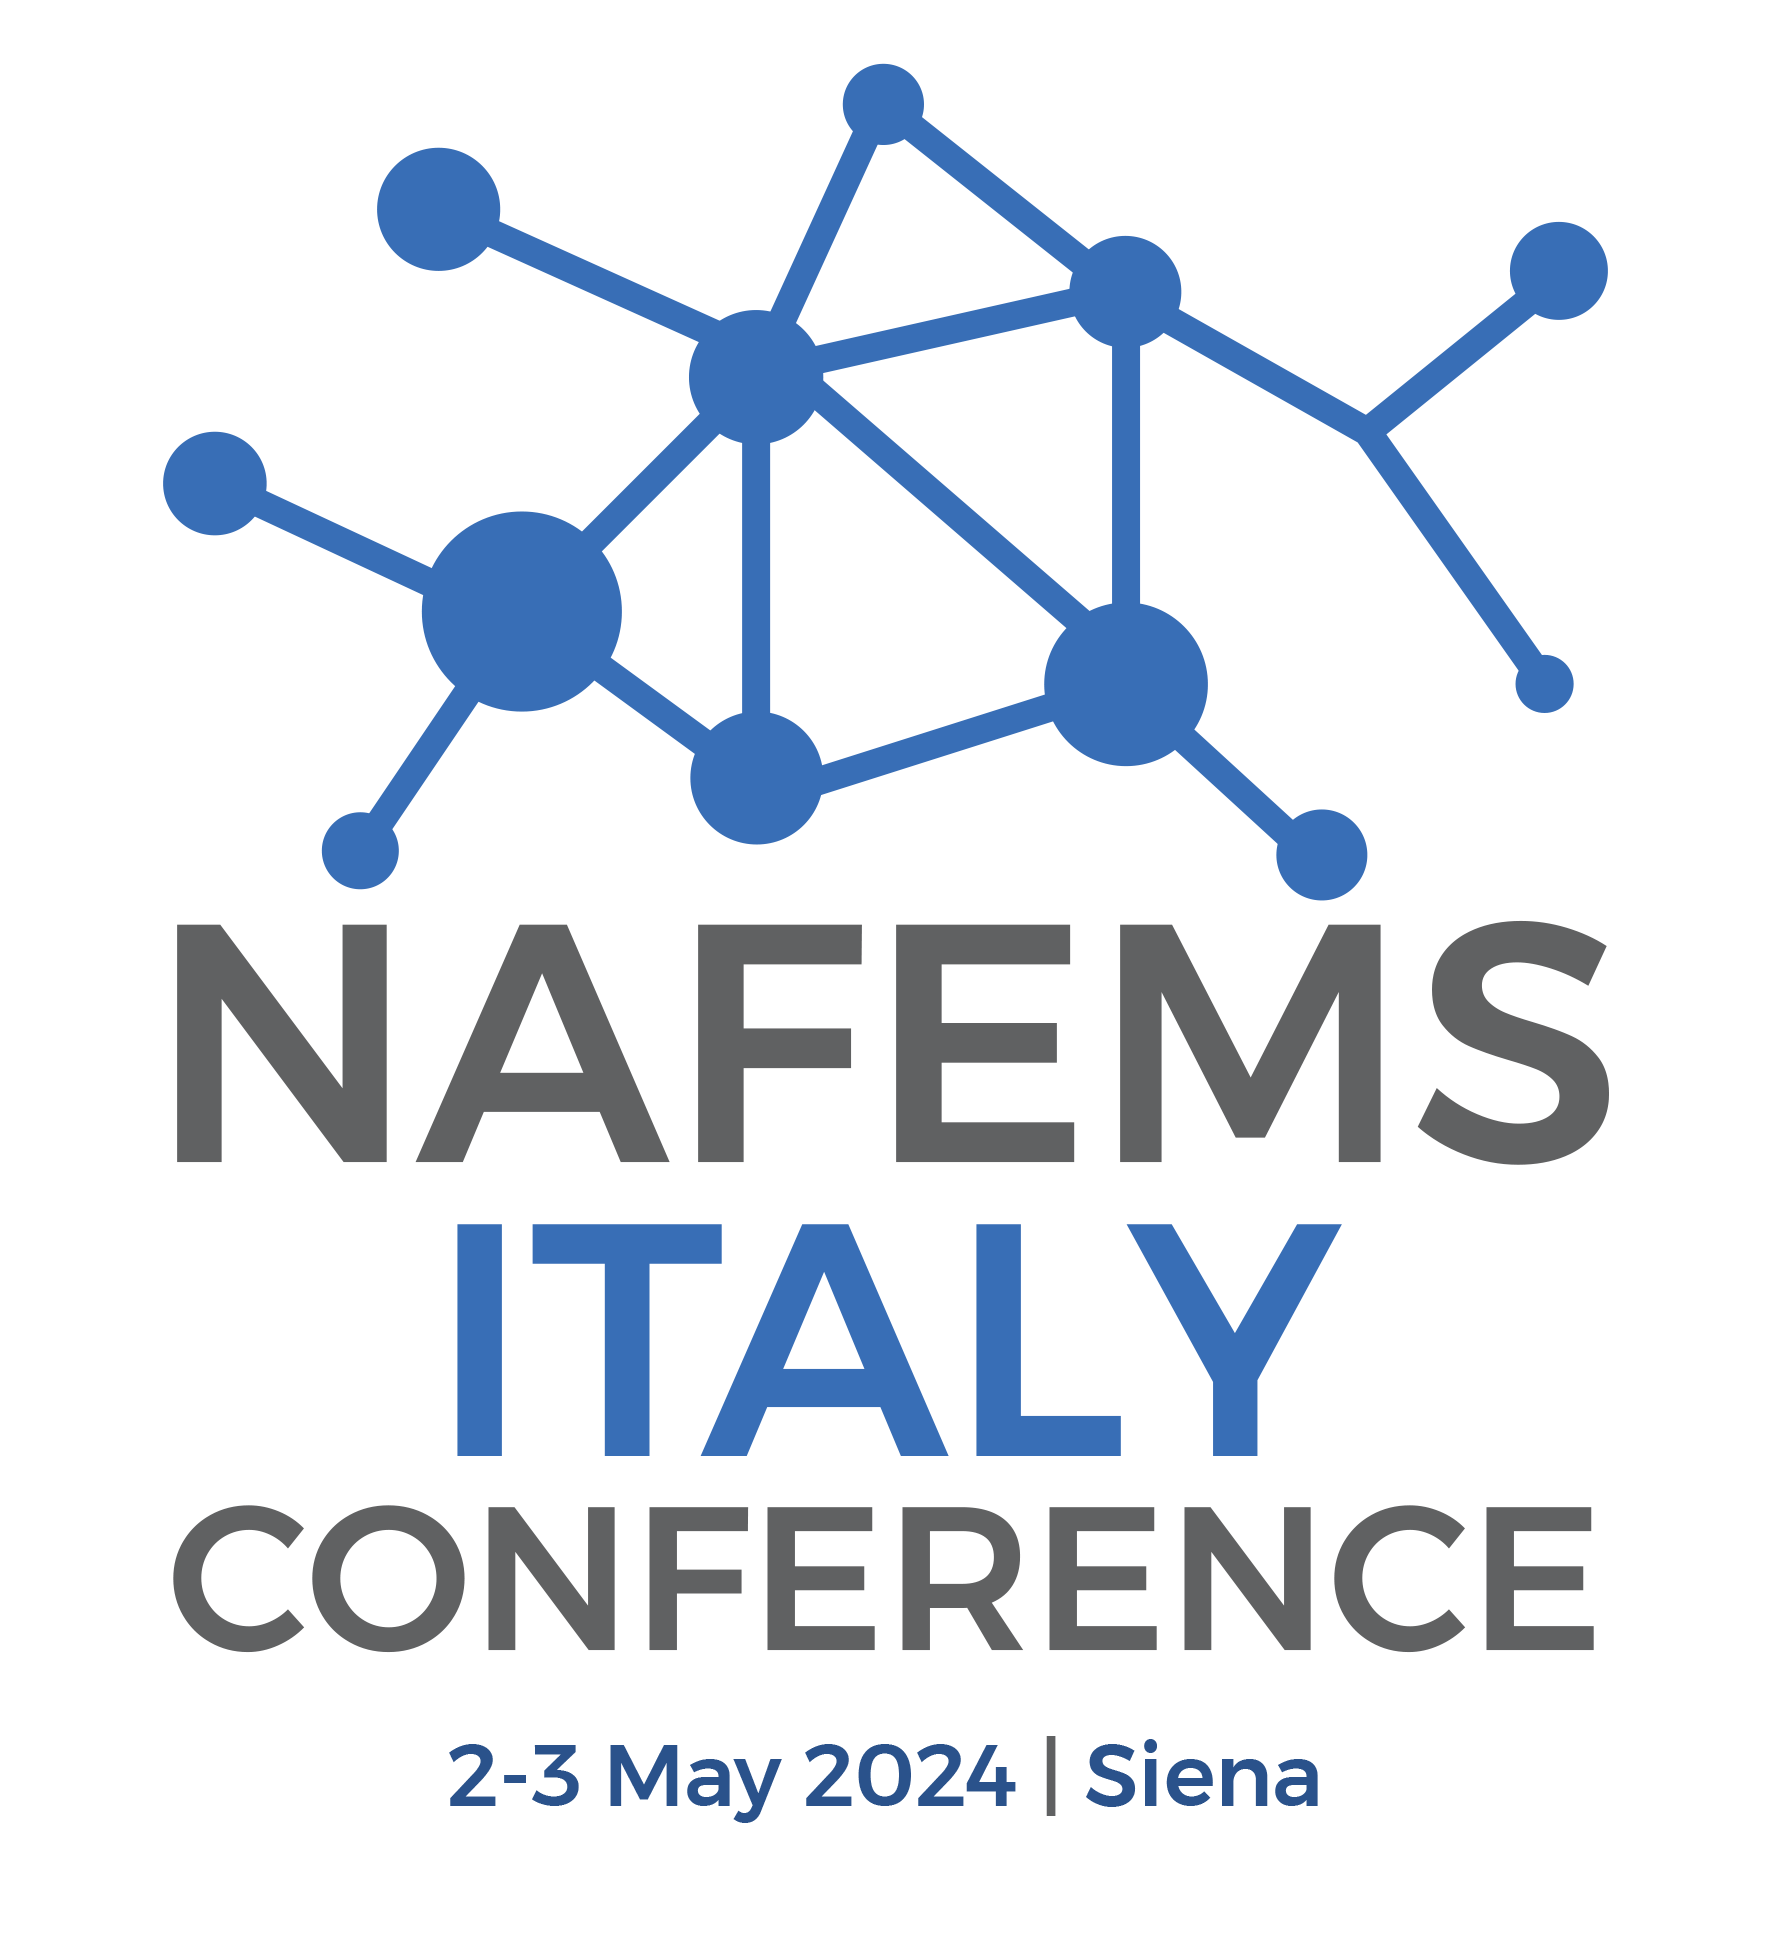 NAFEMS Italy Conference